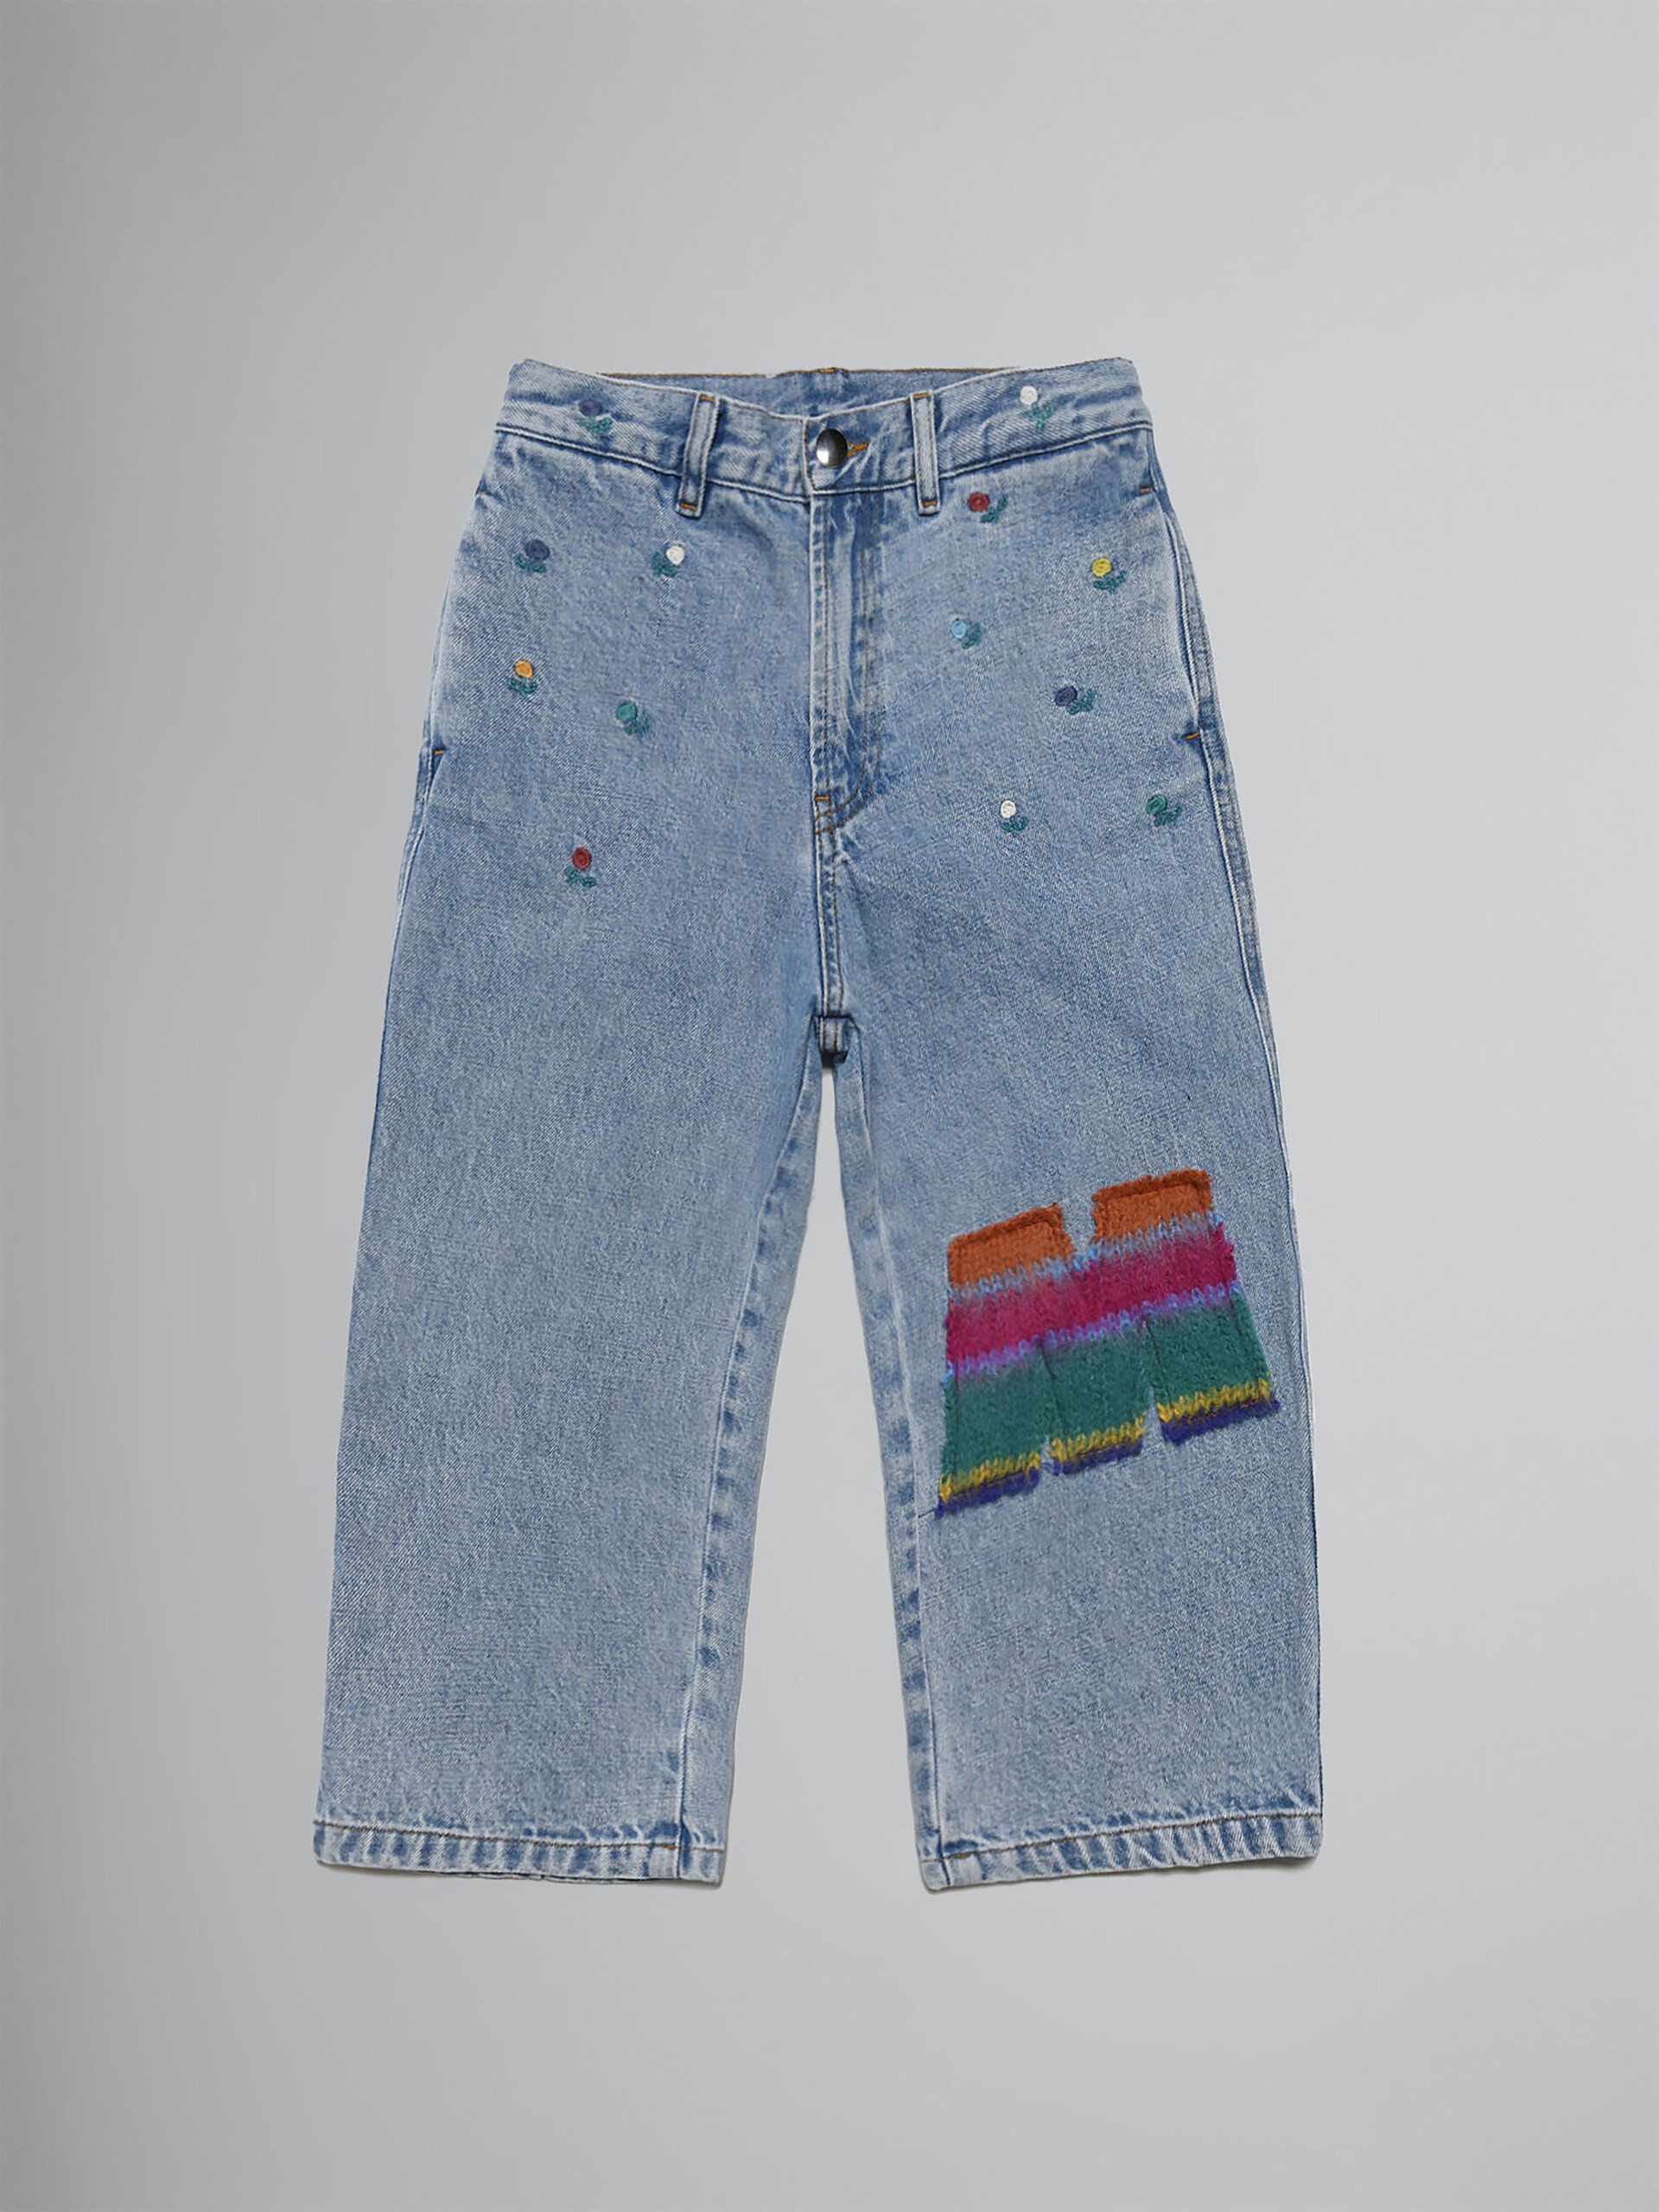 Light denim trousers with floral embroidery and patches - Pants - Image 1